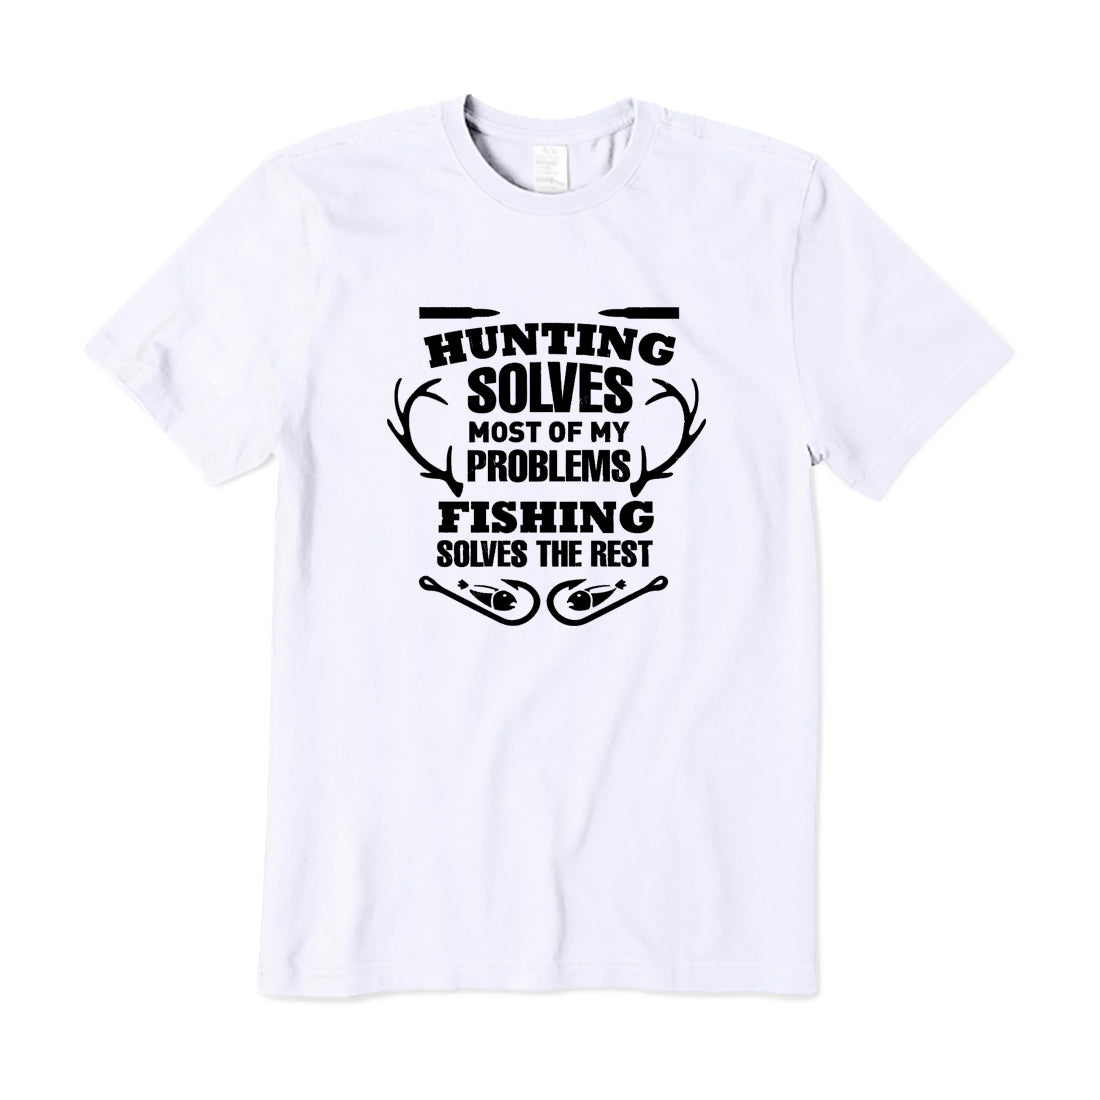 Hunting Solves Most Of My Problems Fishing Solves The Rest T-Shirt